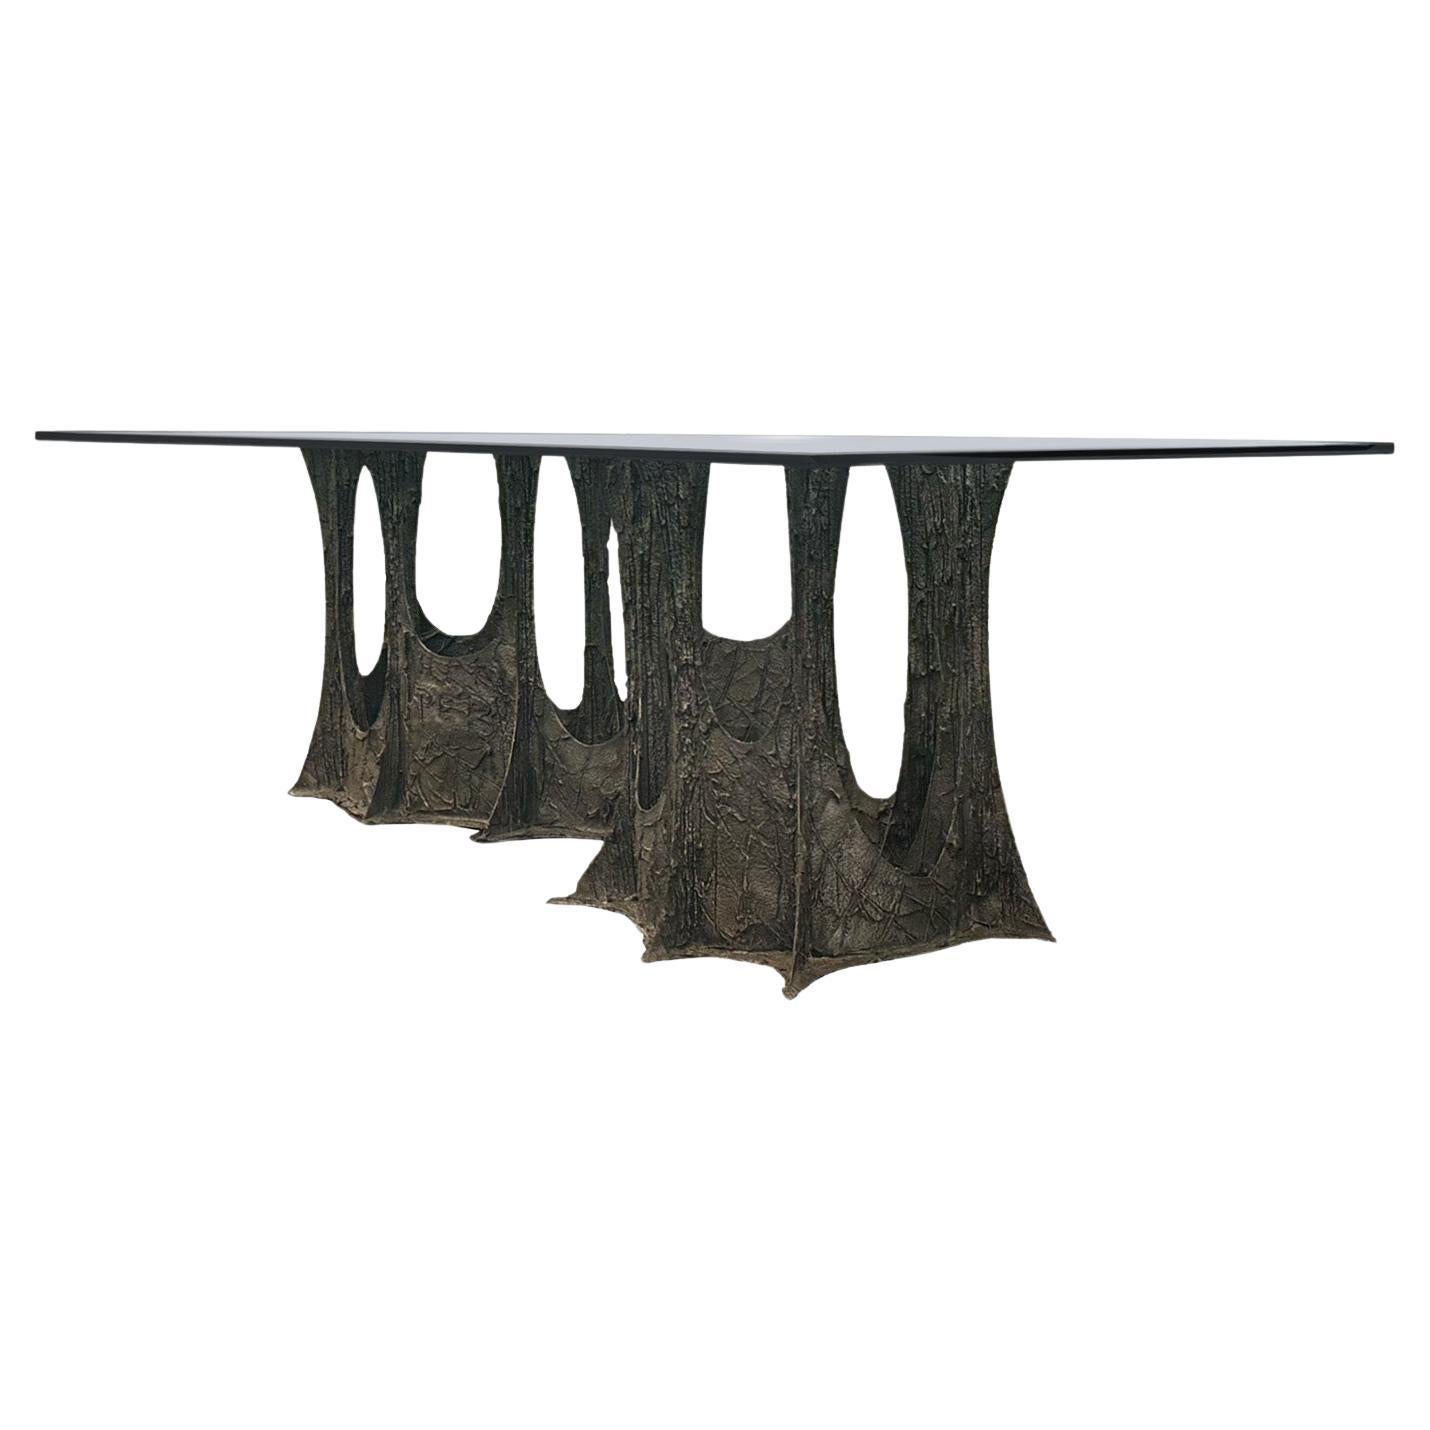 Paul Evans PE 102 Sculpted Bronze Dining Table 1973 (Signed) For Sale